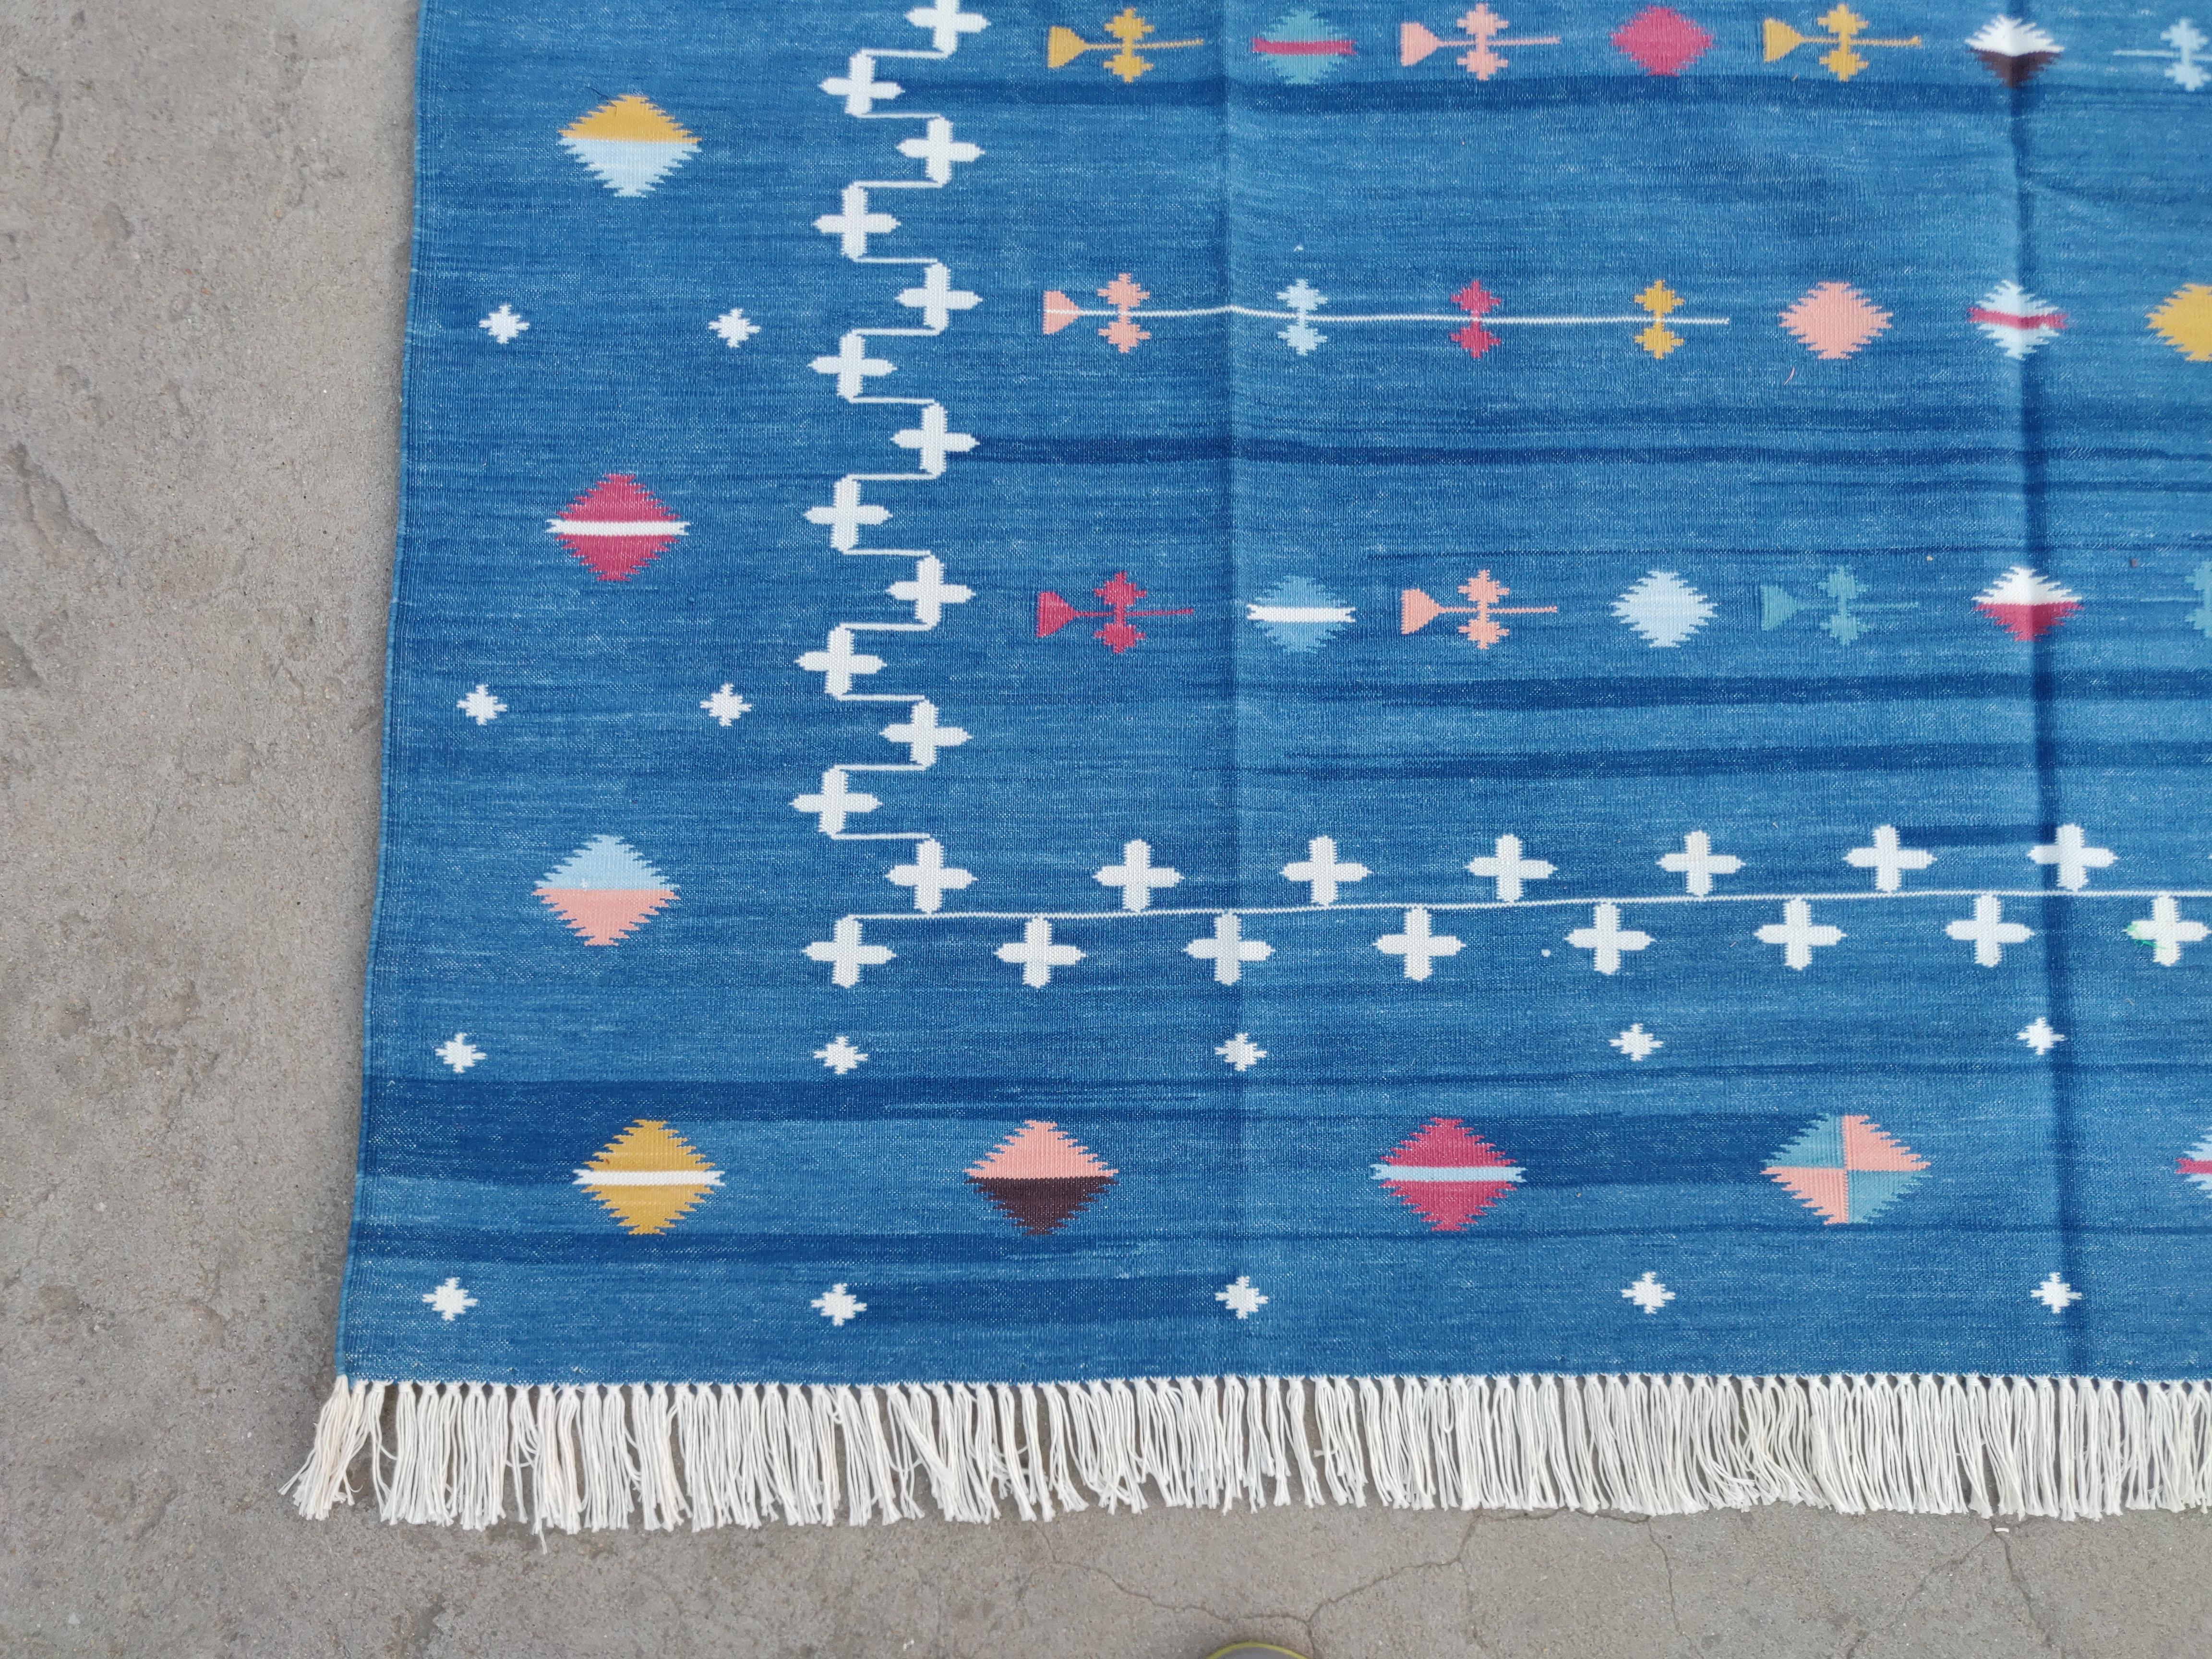 Contemporary Handmade Cotton Area Flat Weave Rug, 6x9 Blue And White Shooting Star Dhurrie For Sale